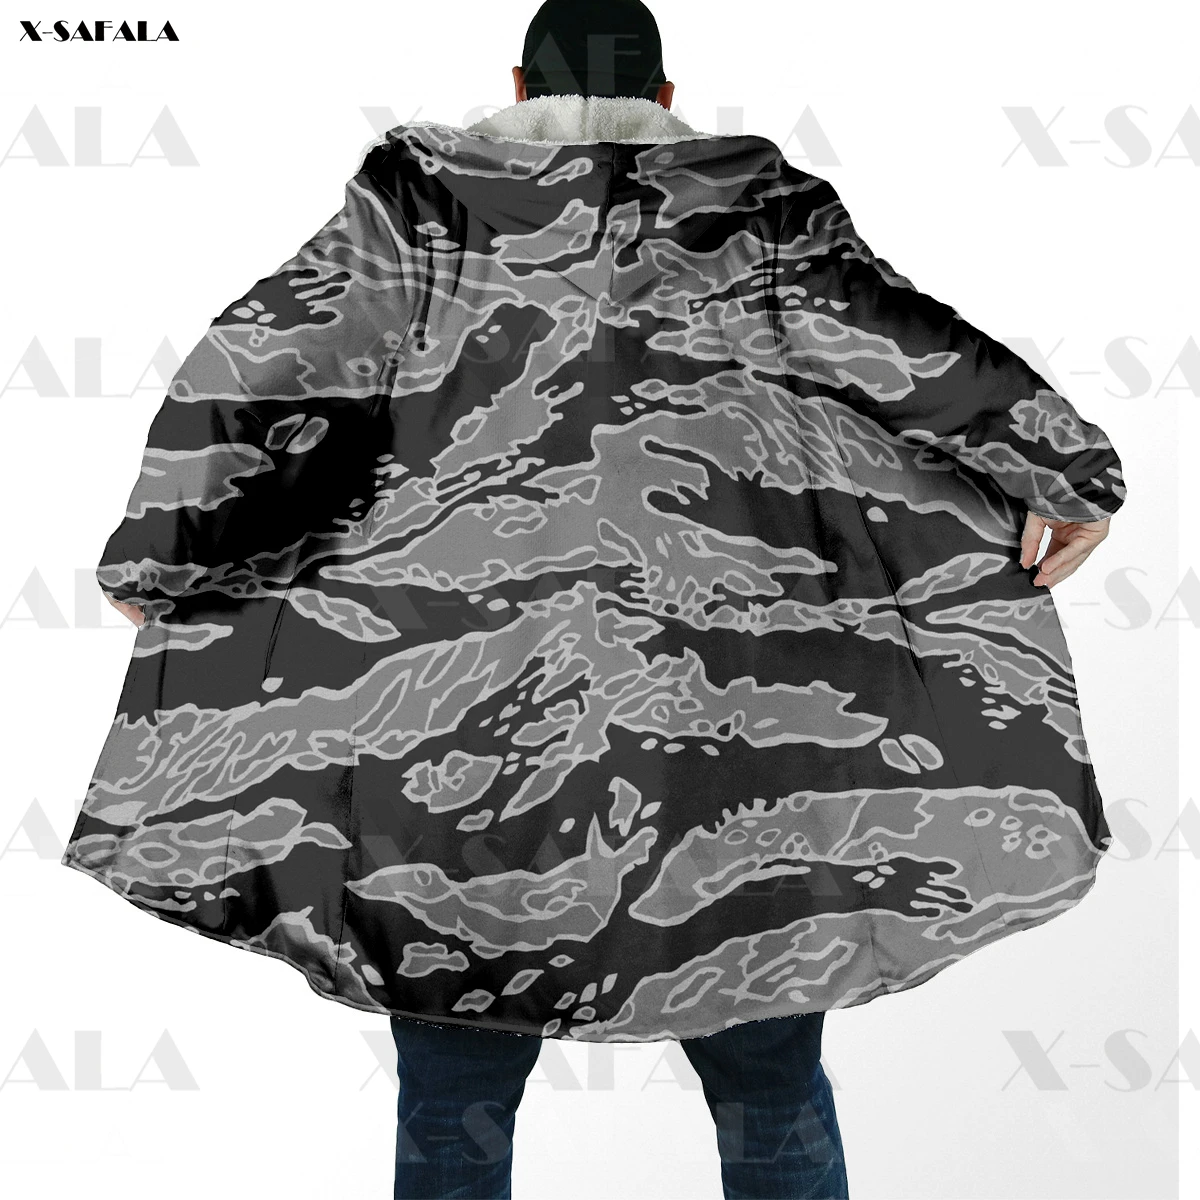 

Crocodile Camo Army Printed Hoodie Long Duffle Topcoat Hooded Blanket Cloak Thick Jacket Cotton Pullovers Overcoat